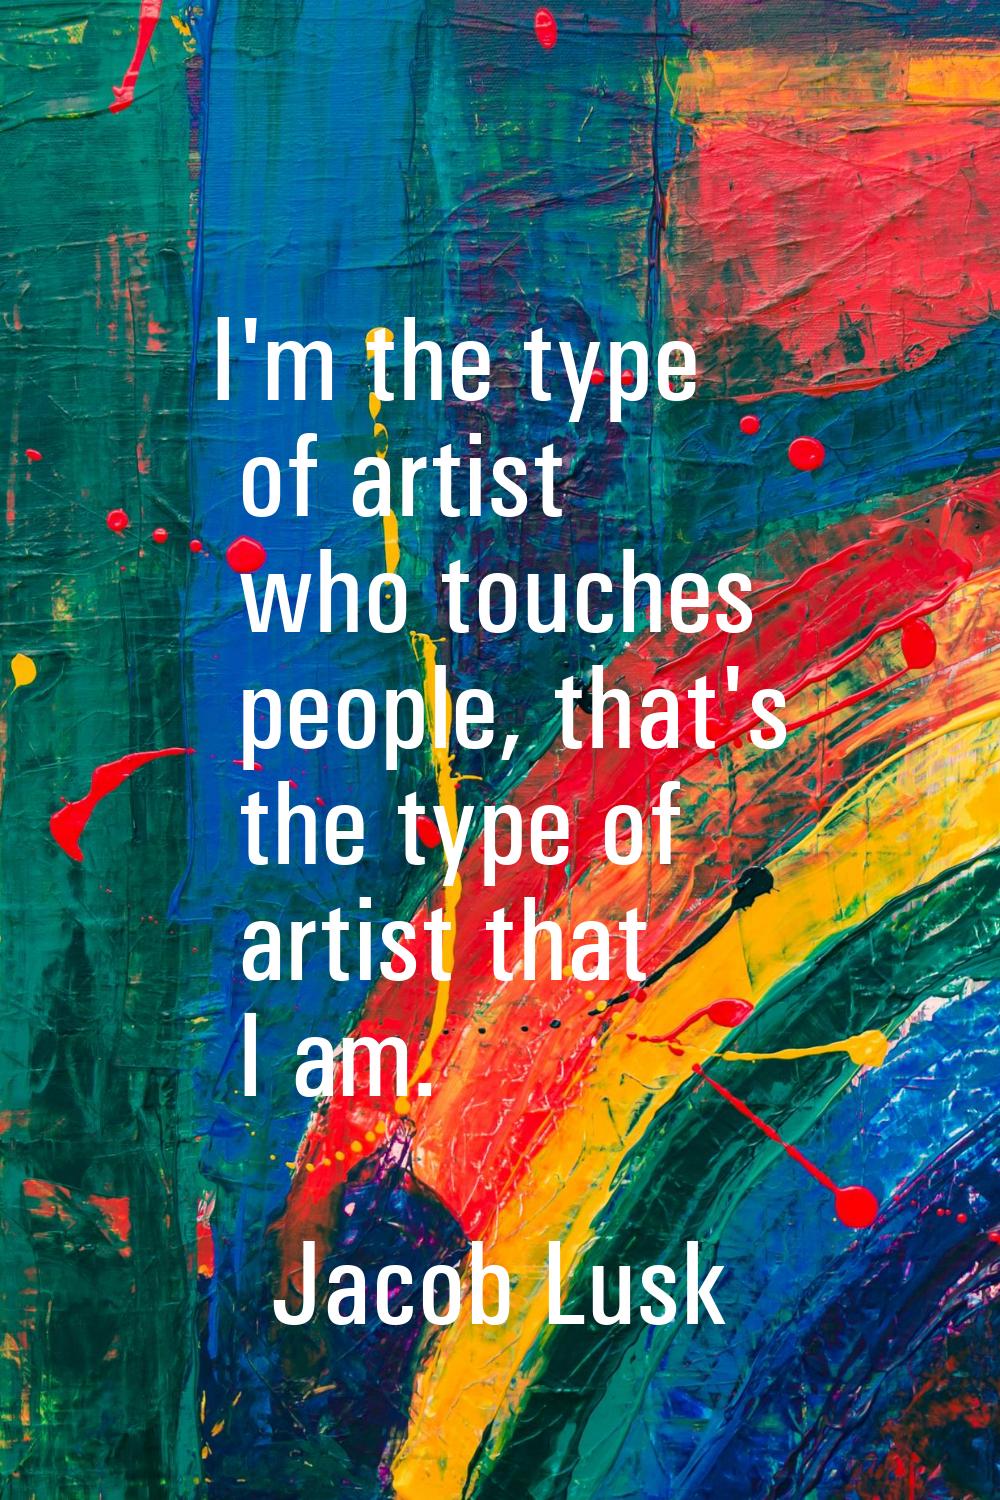 I'm the type of artist who touches people, that's the type of artist that I am.